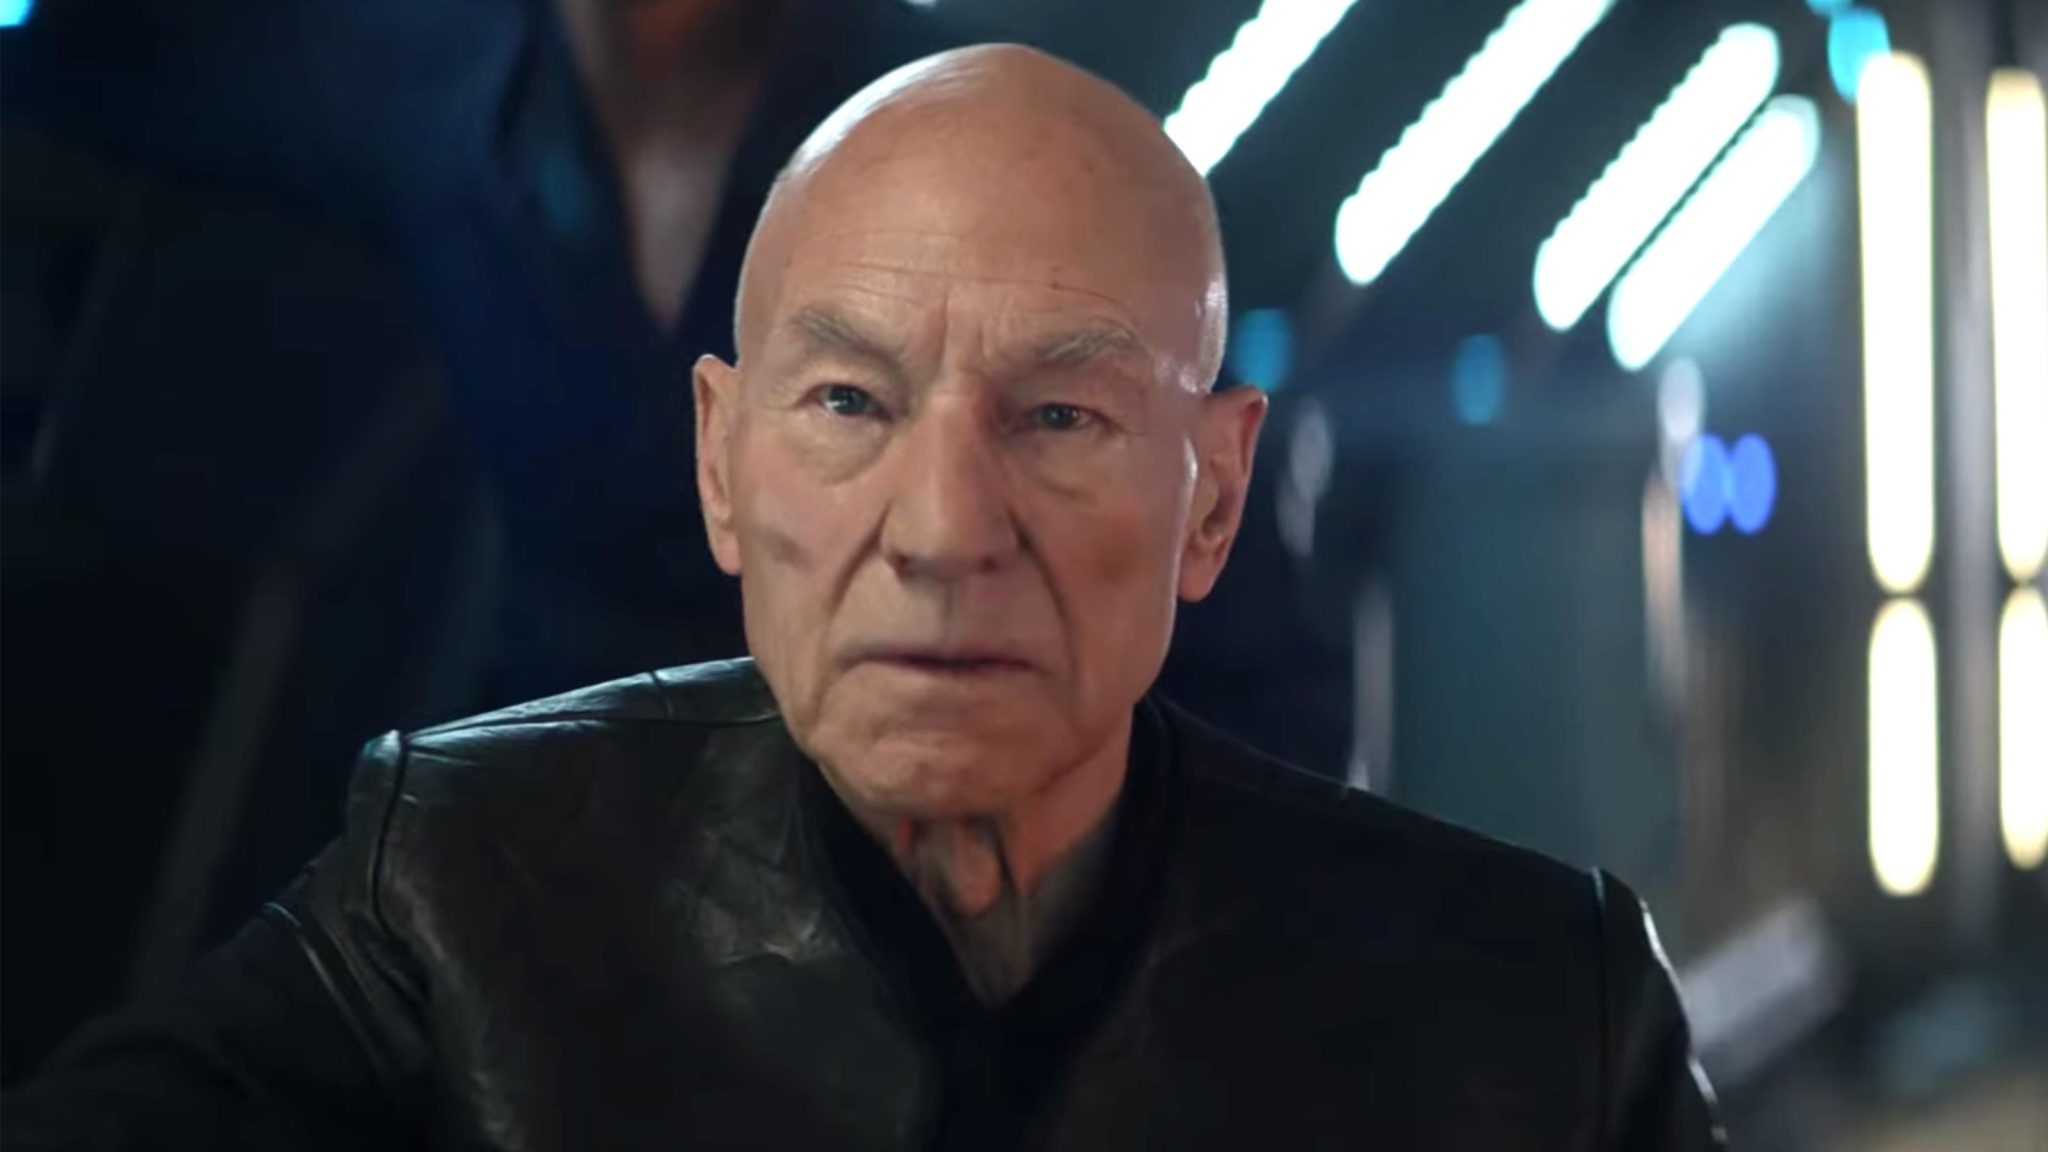 Paramount+ Releases First Look Trailer for ‘Picard’ Season 2